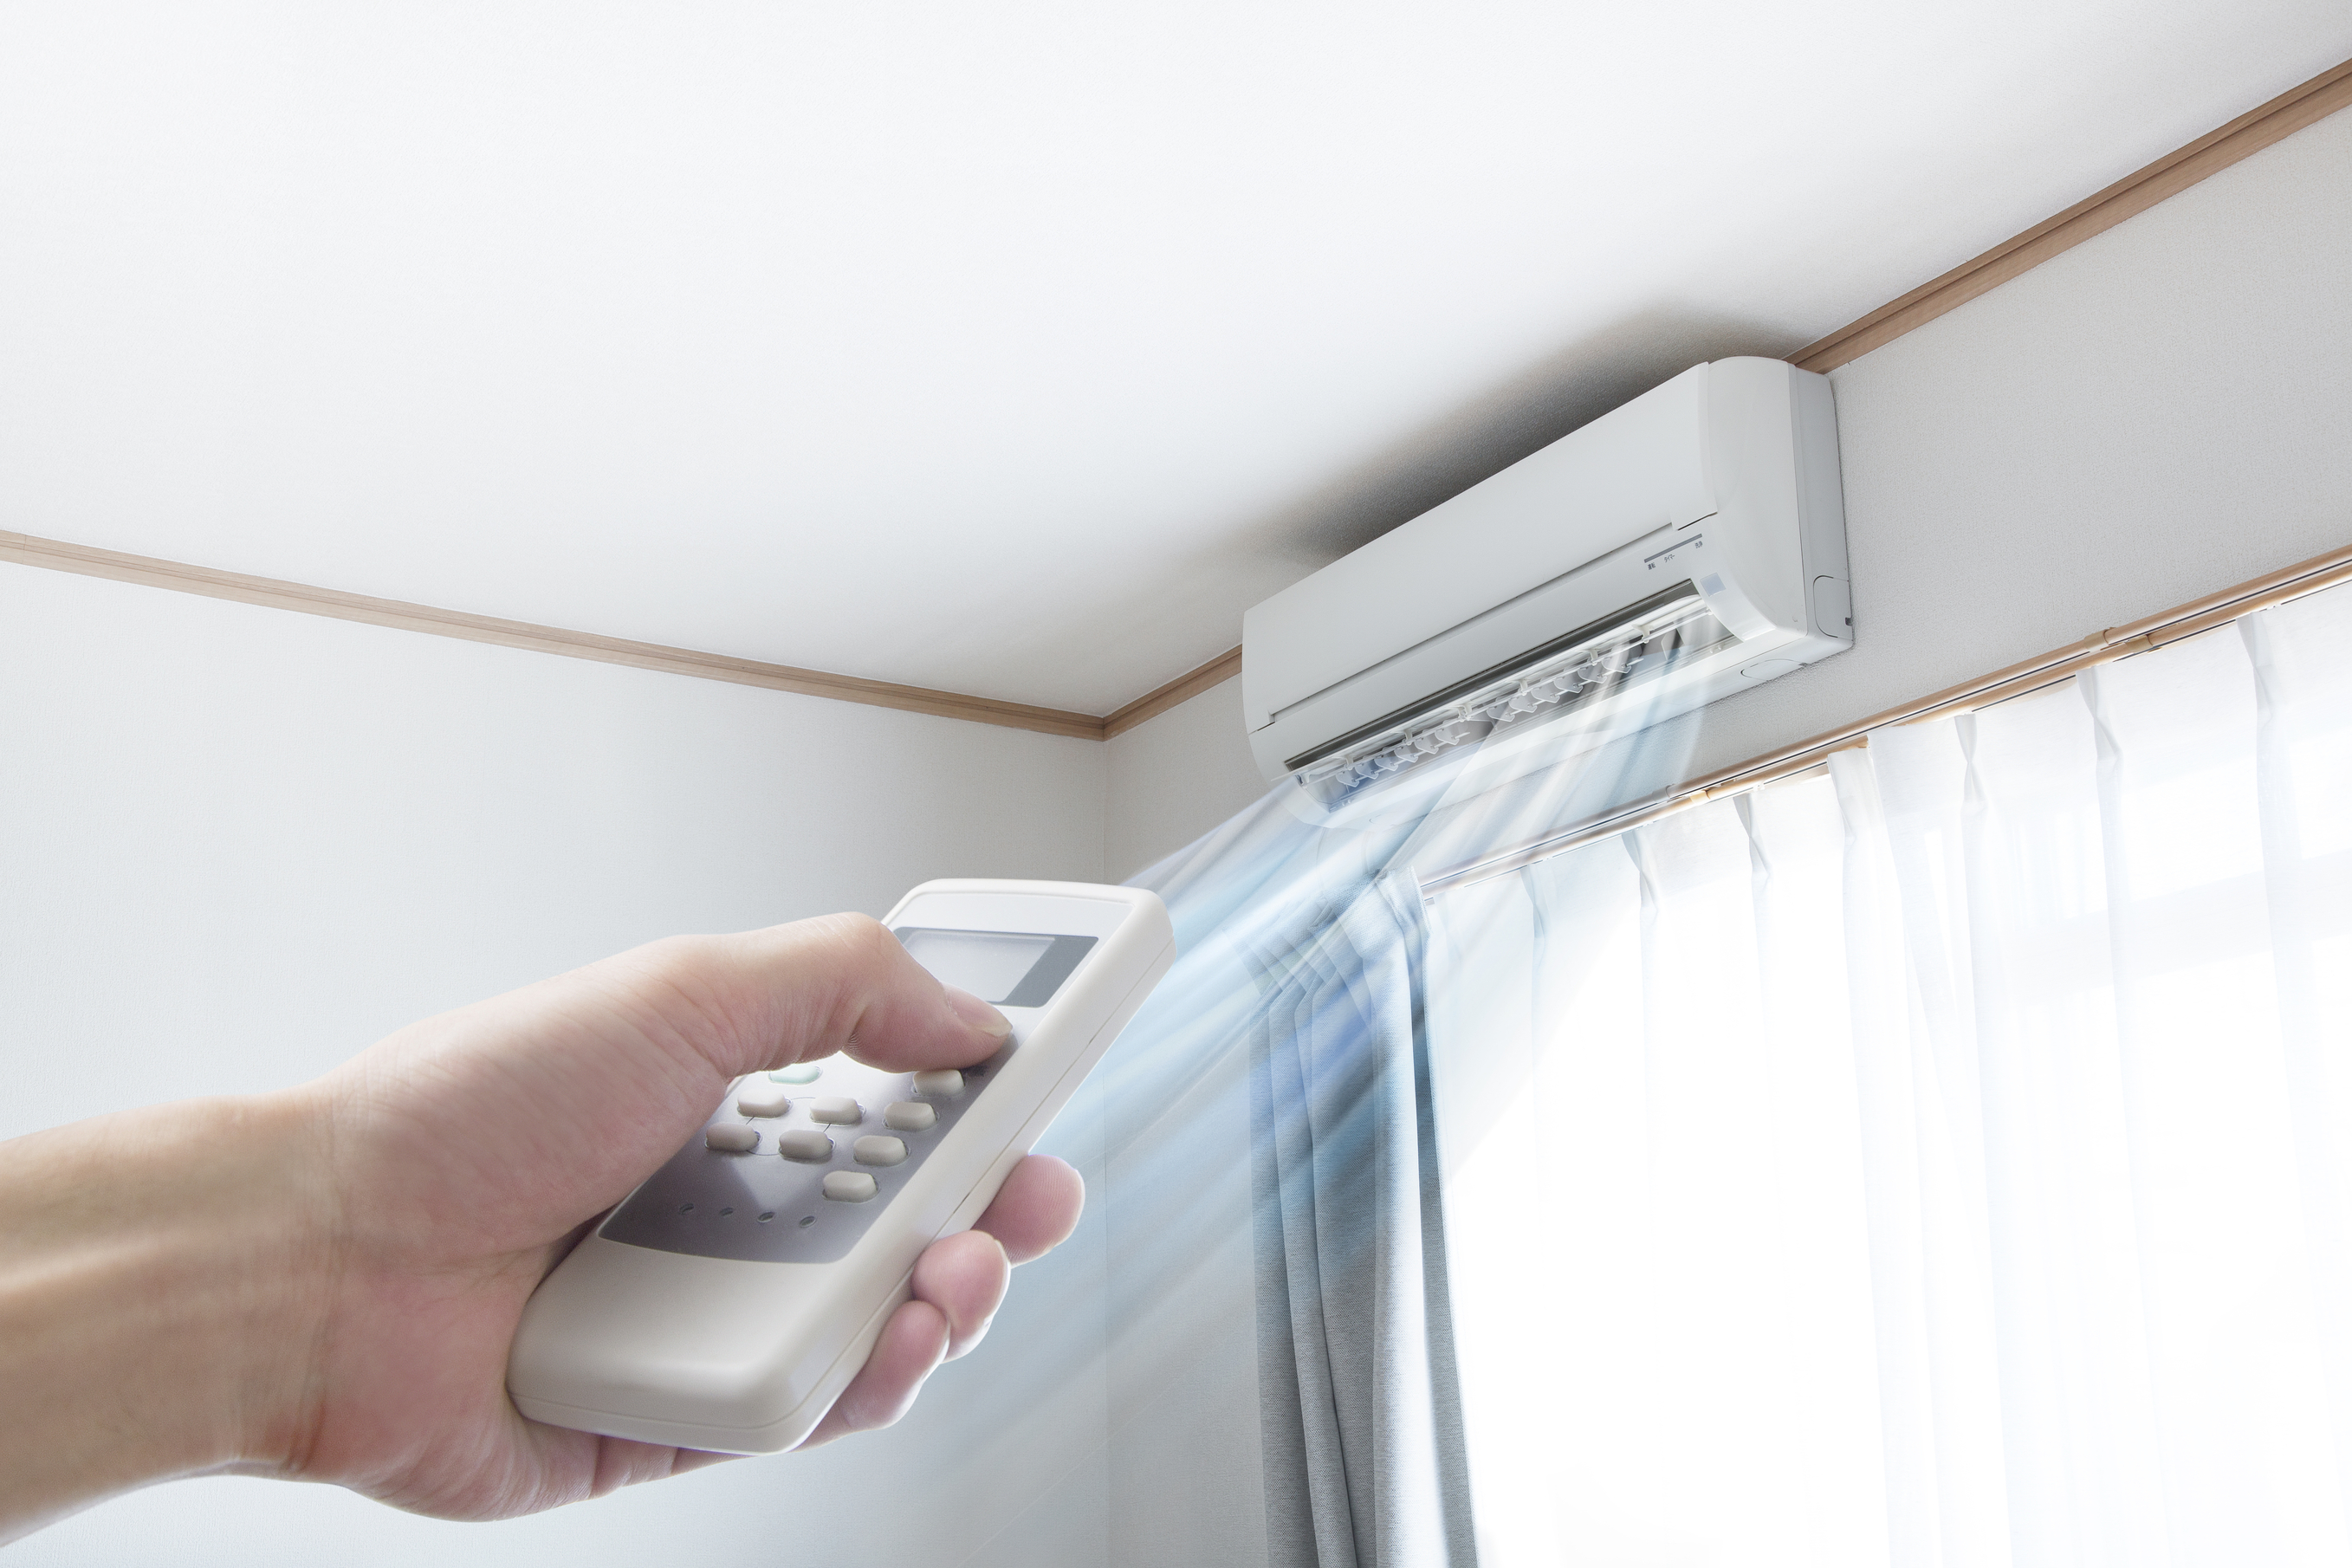 Hand pointing a remote at a ductless mini-split that’s blowing cold air